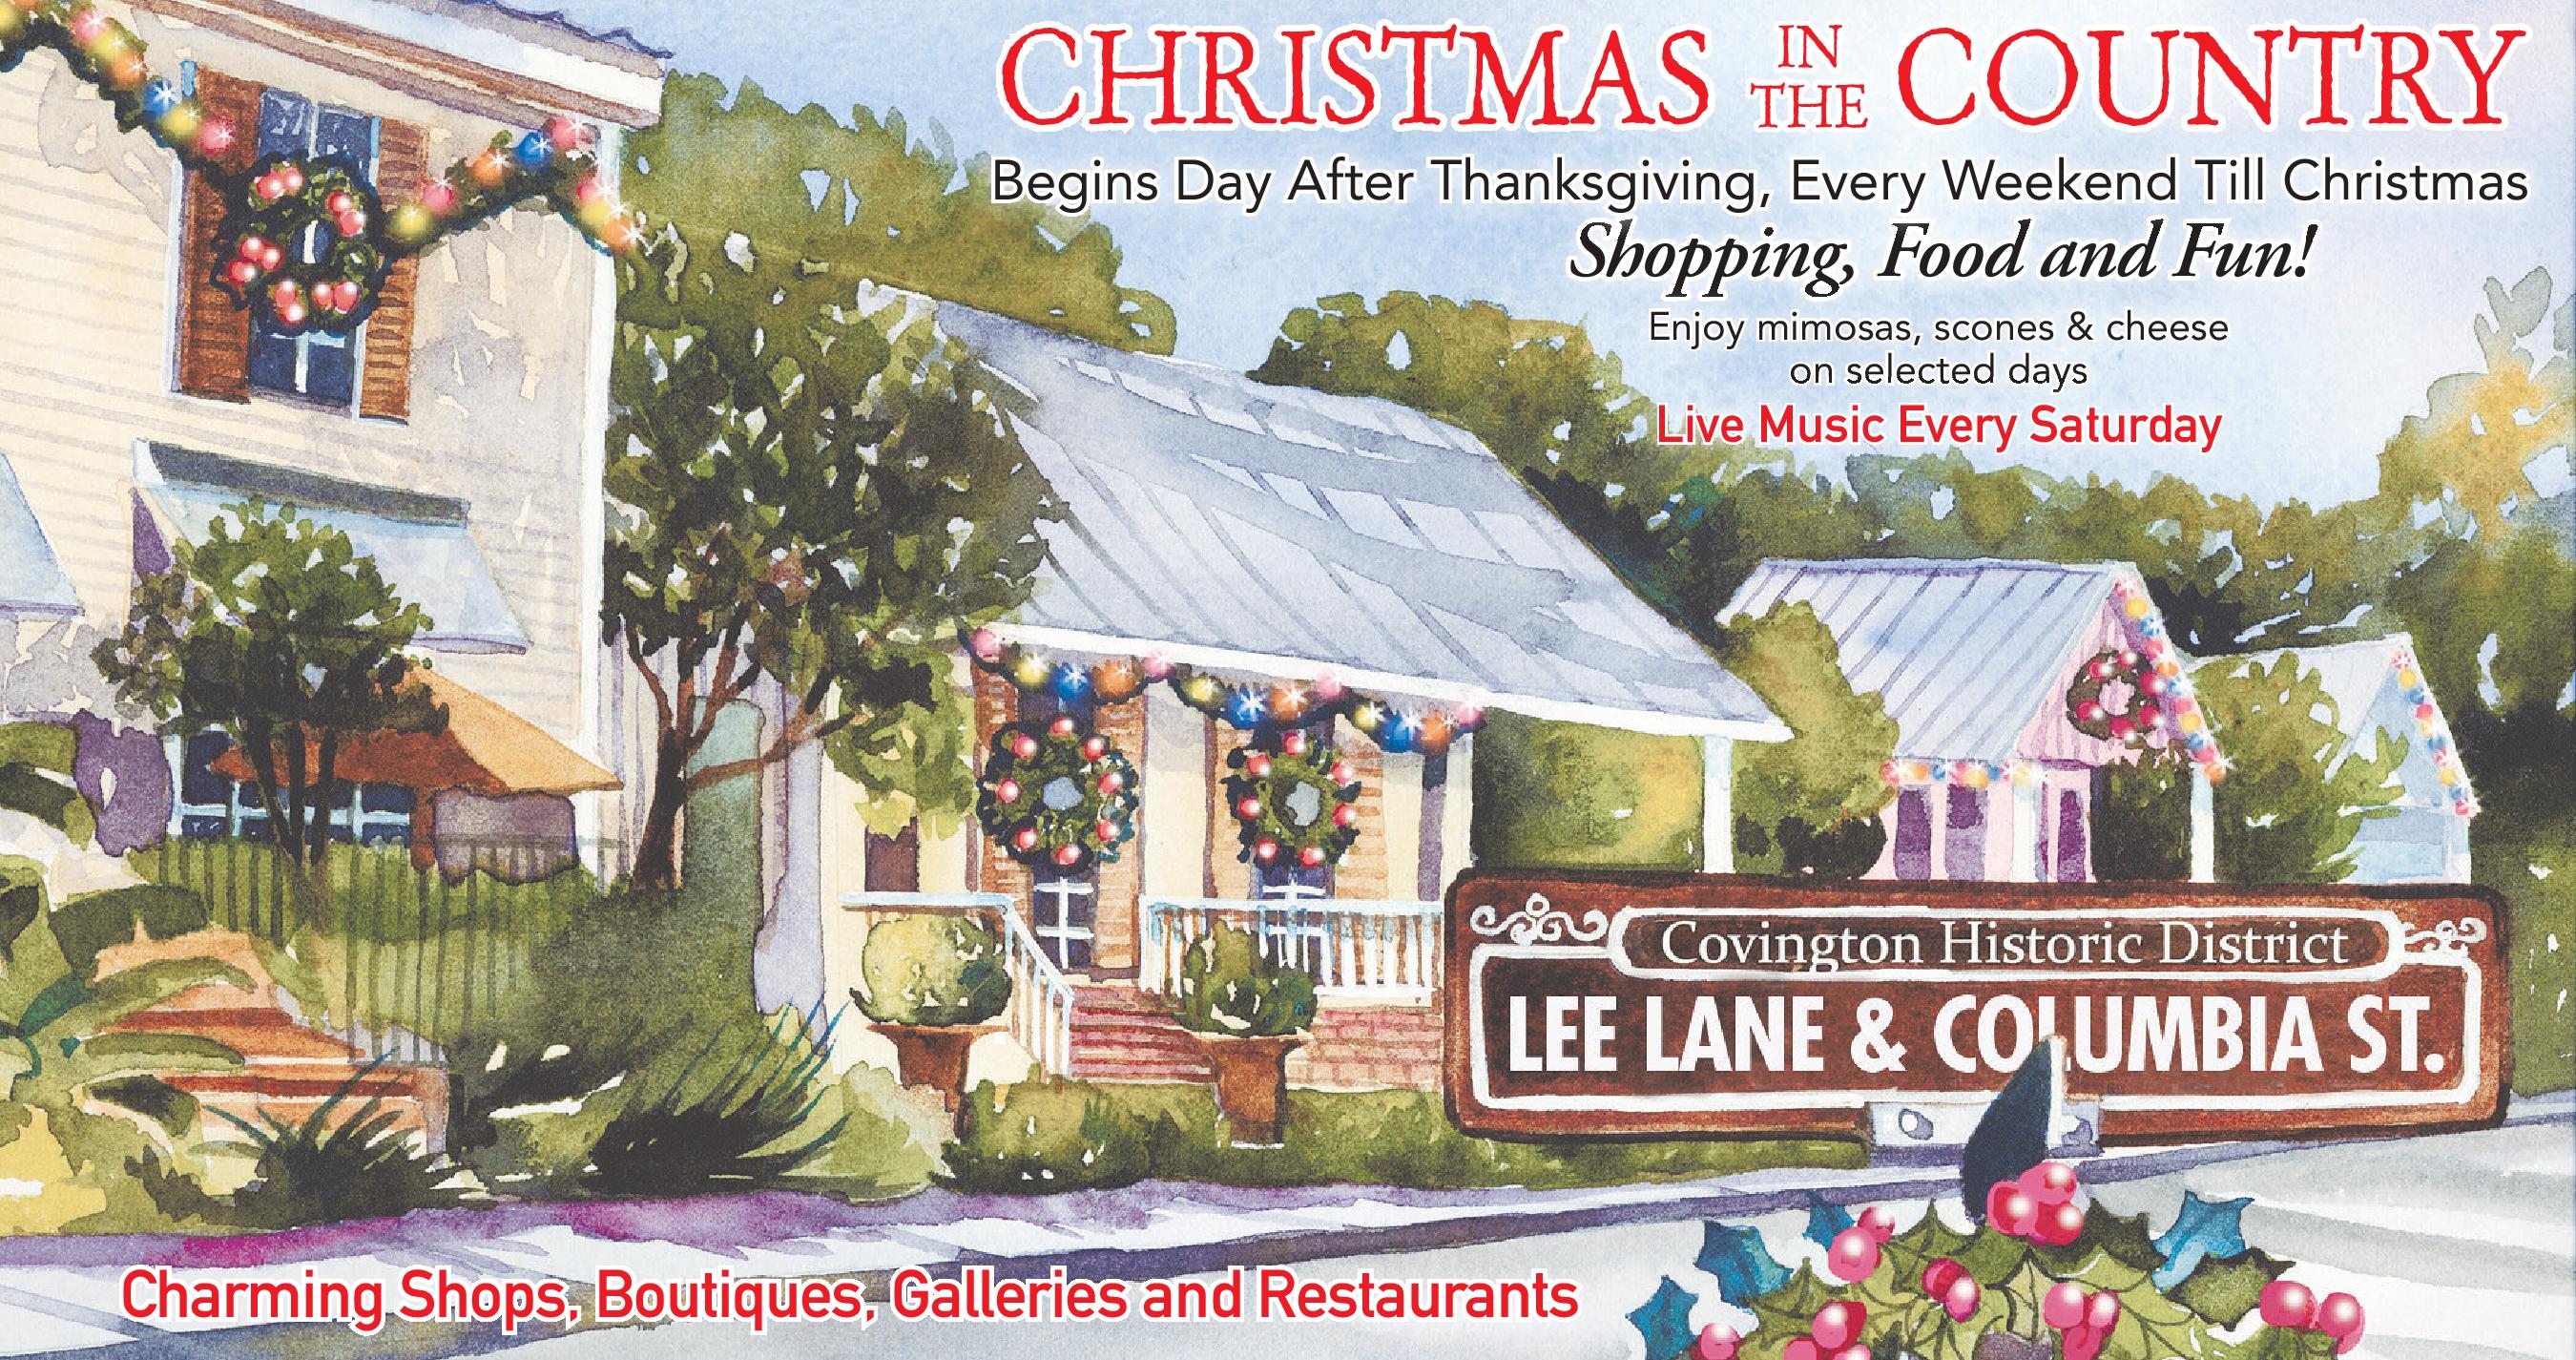 “Christmas in the Country” Begins Friday on Lee Lane & Columbia Street